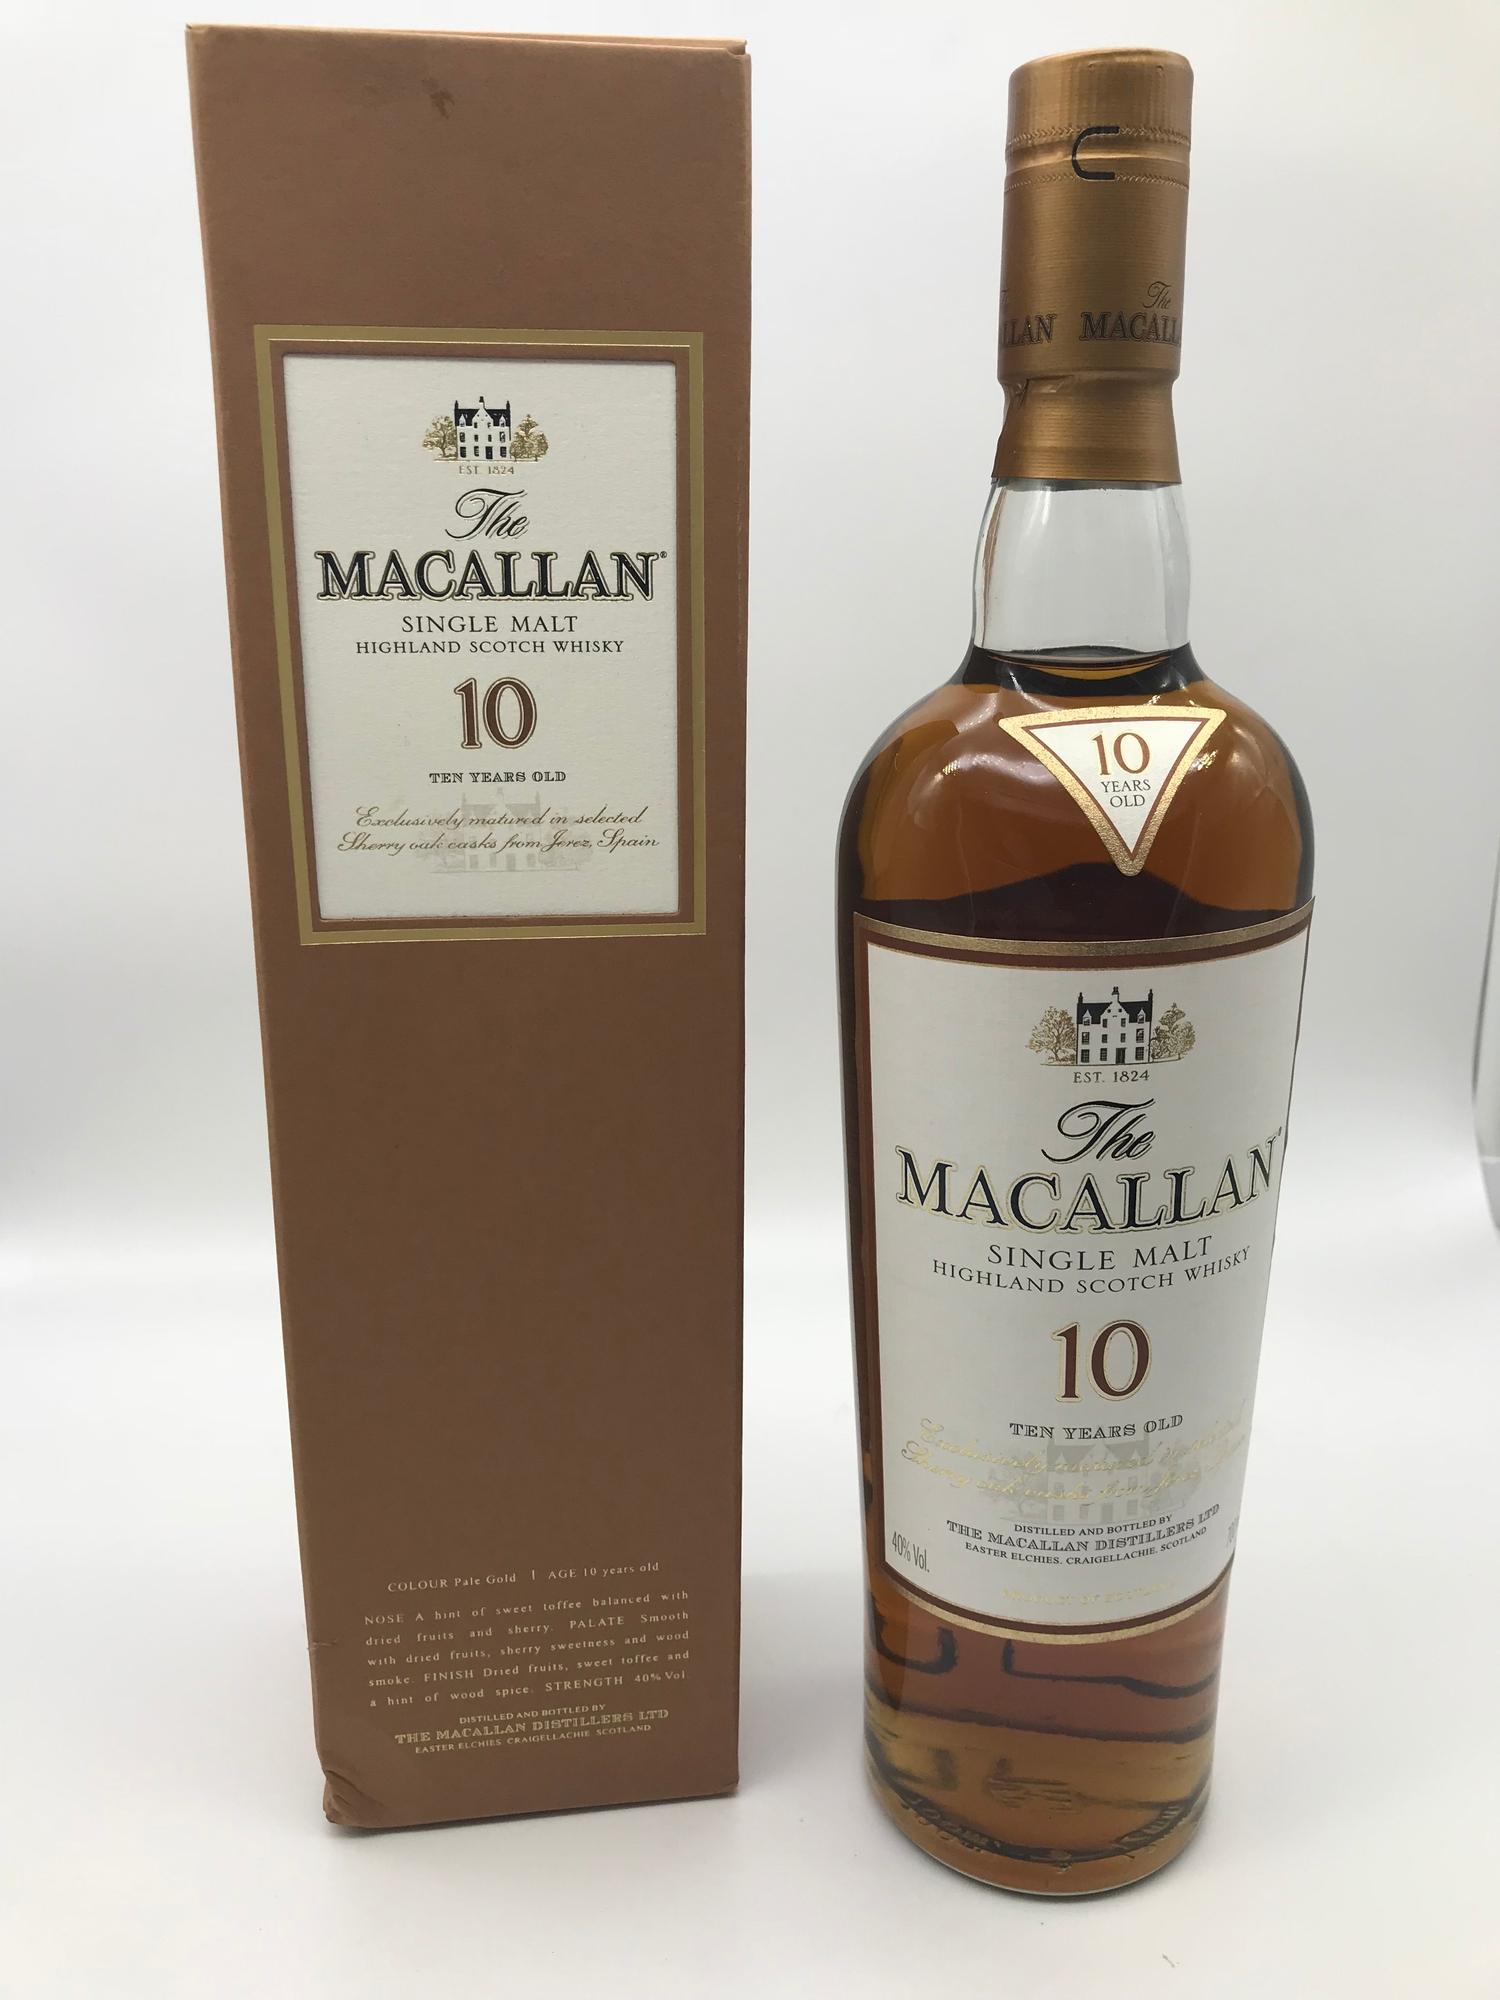 The Macallan 10 year old single malt Highland Scotch Whisky, Exclusively matured in selected